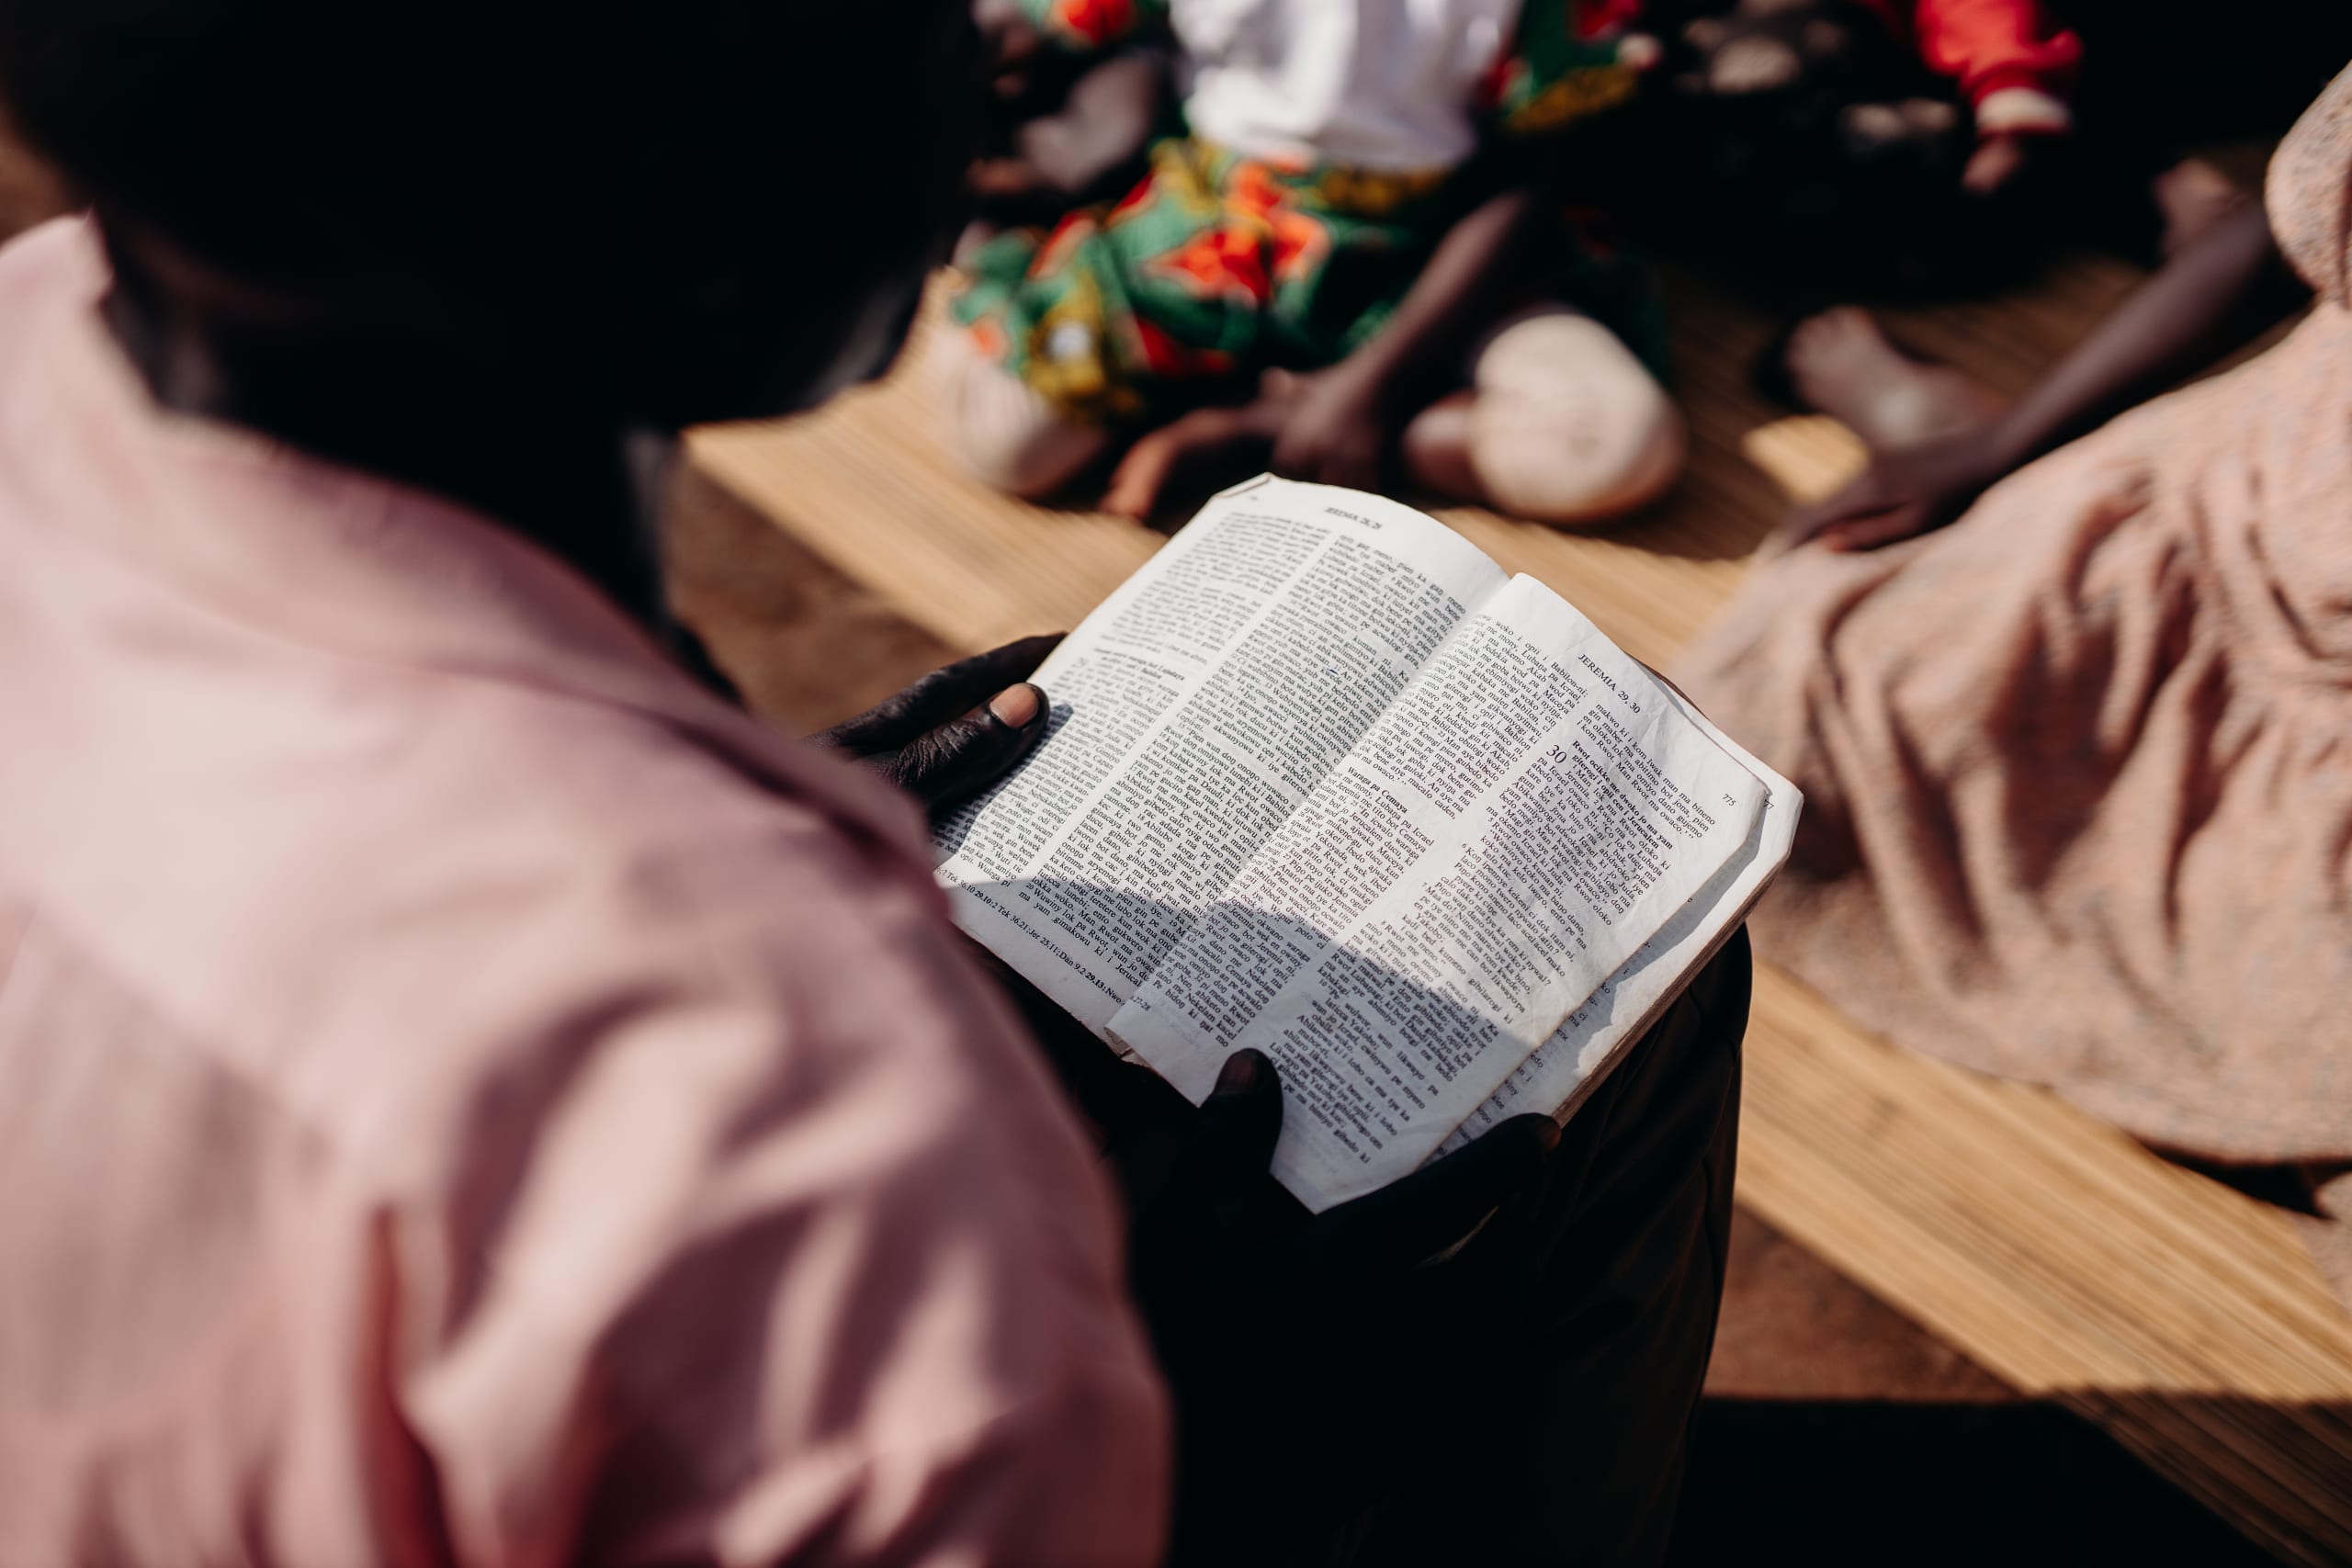 A teenager in Uganda reading the Bible.